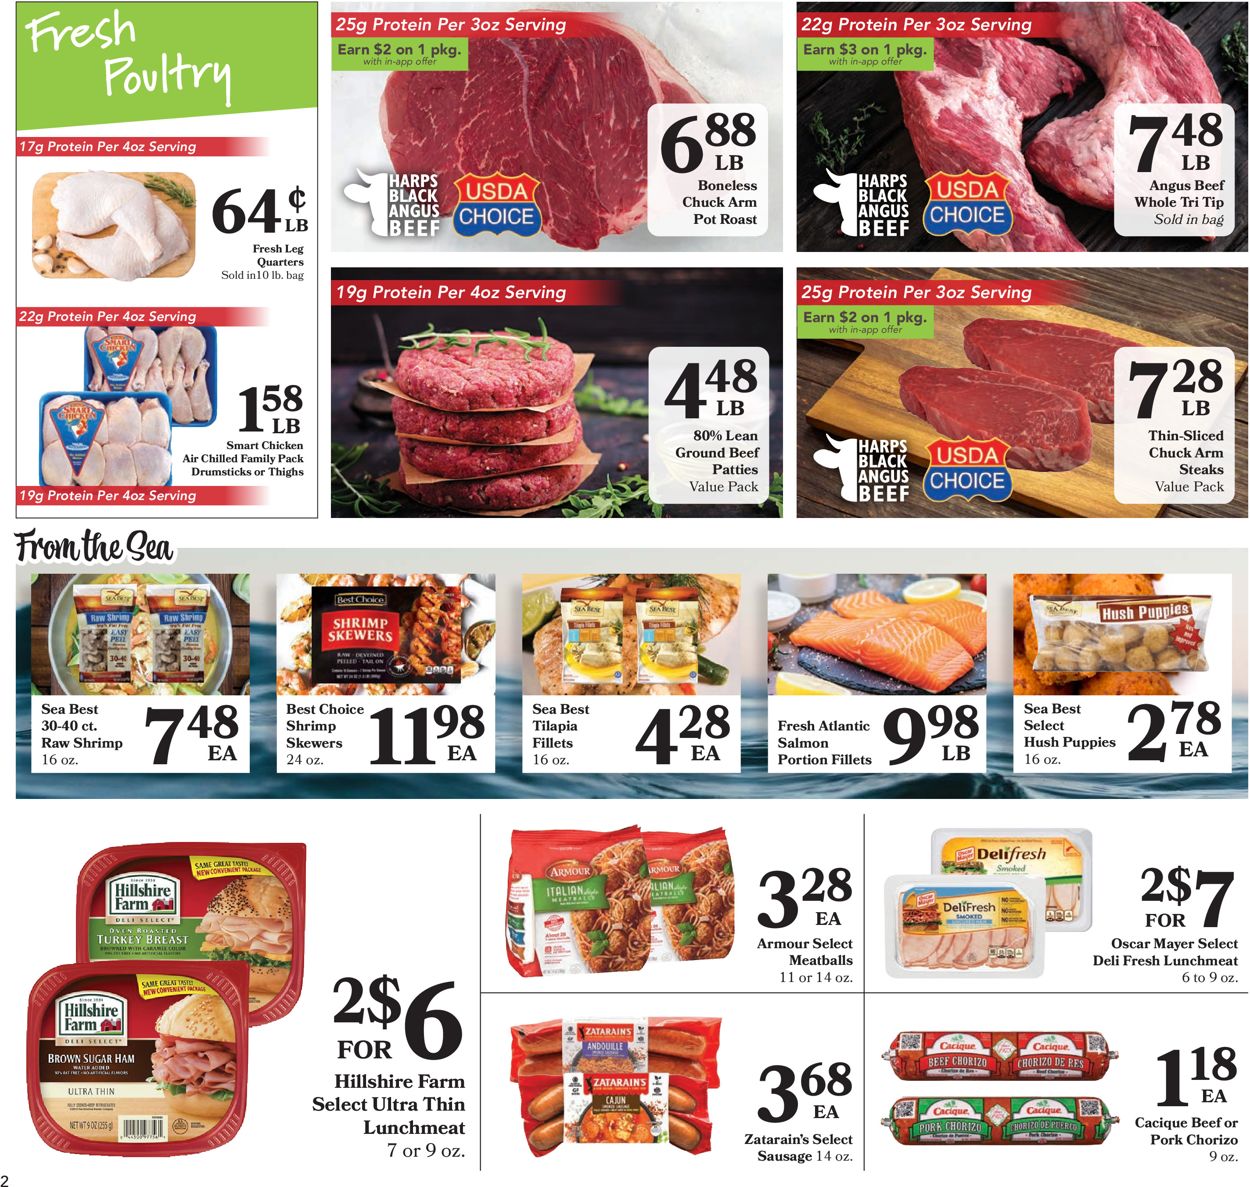 Catalogue Harps Foods from 09/22/2021